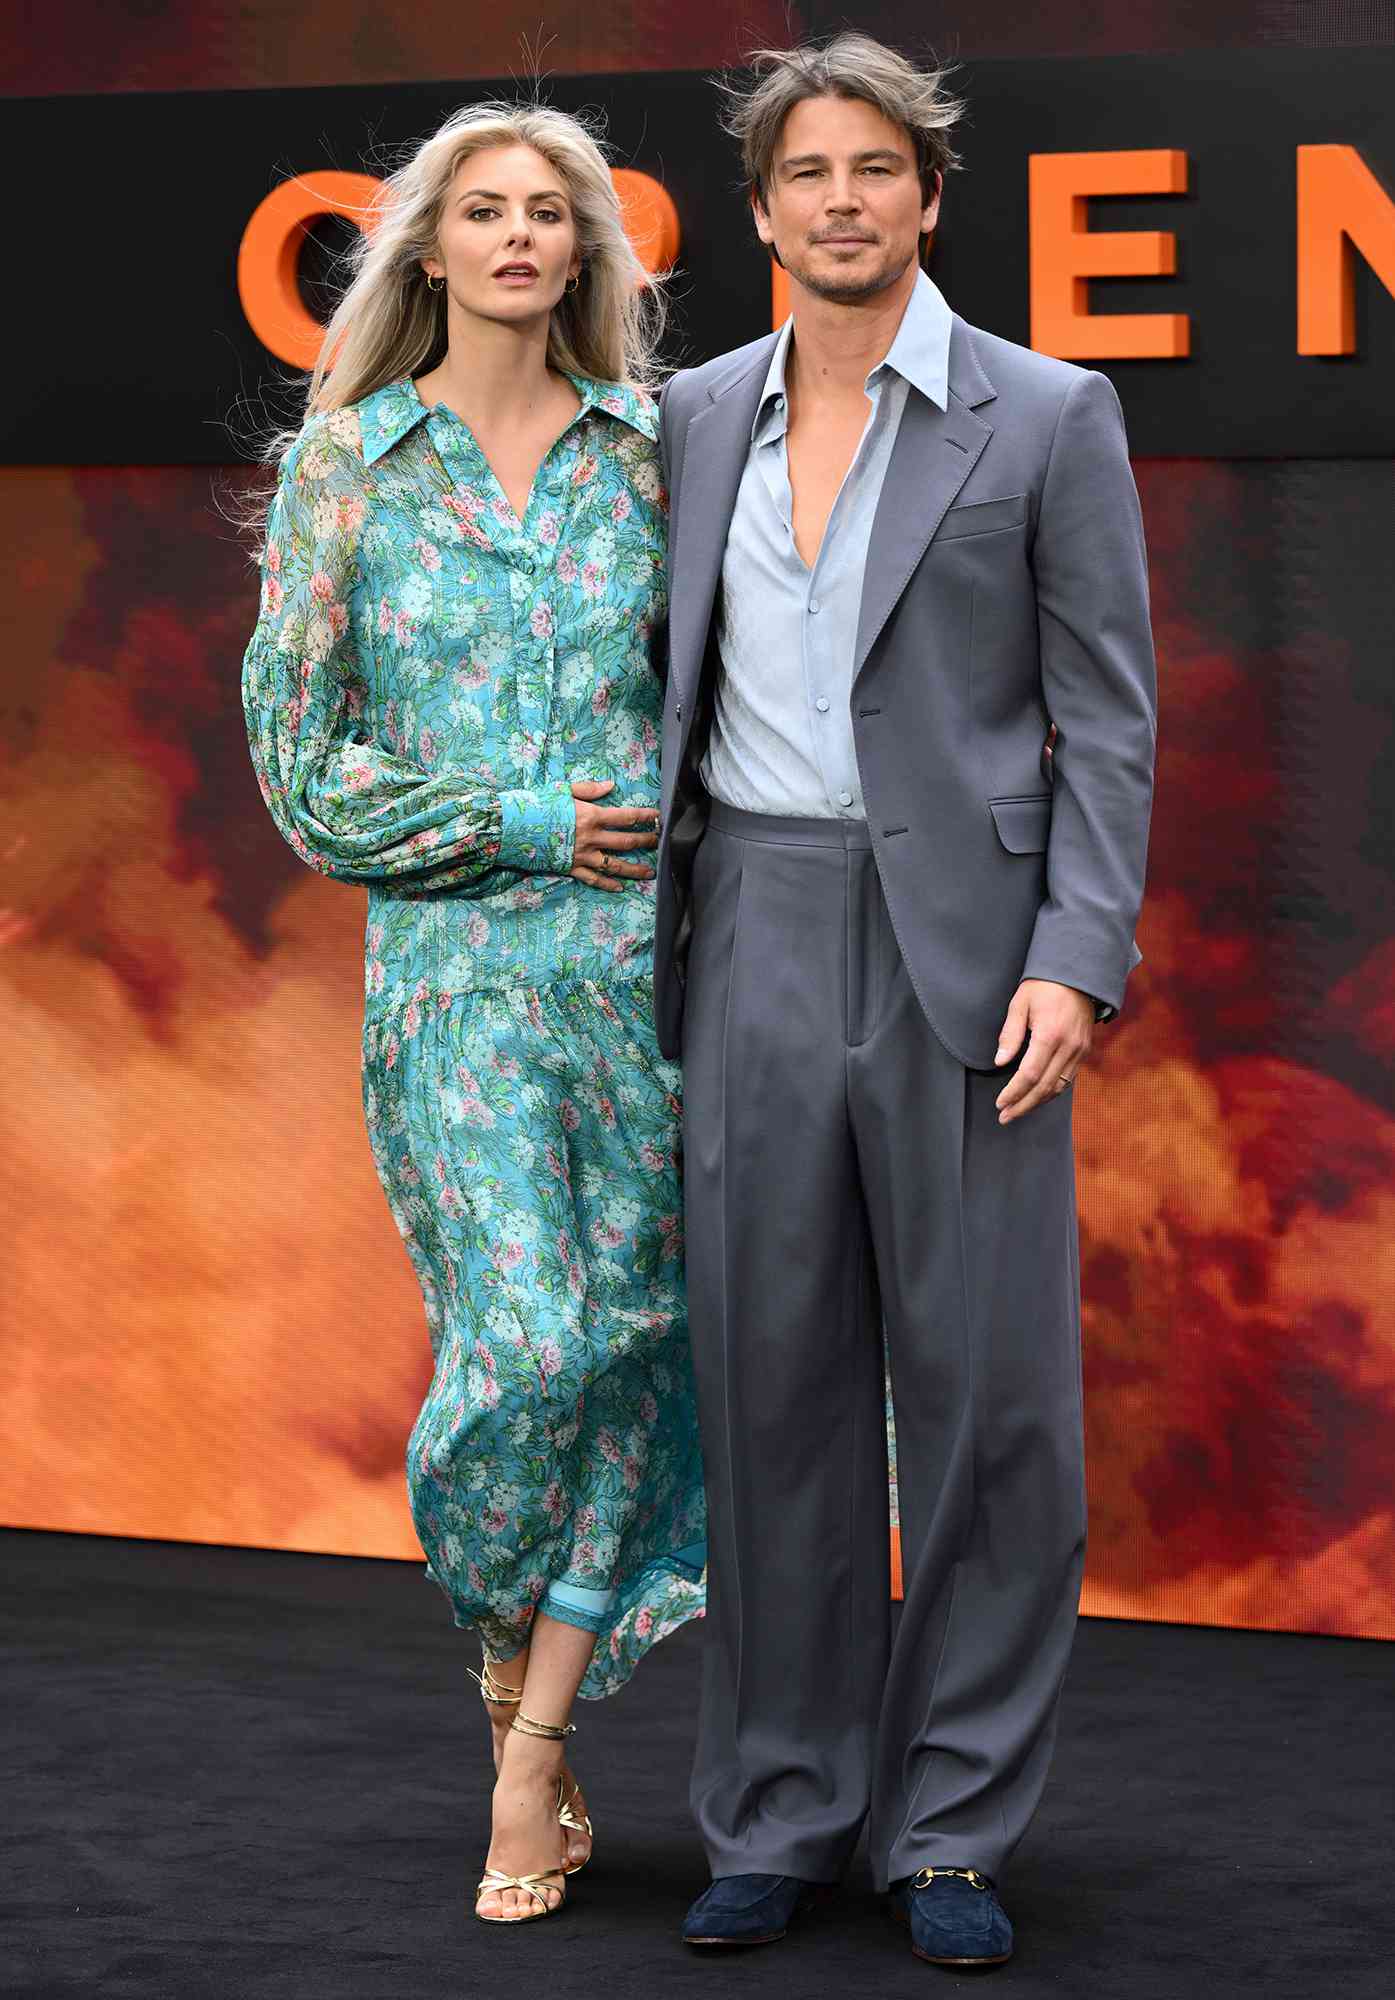 Tamsin Egerton and Josh Hartnett attend the "Oppenheimer" UK Premiere at Odeon Luxe Leicester Square on July 13, 2023 in London, England. 